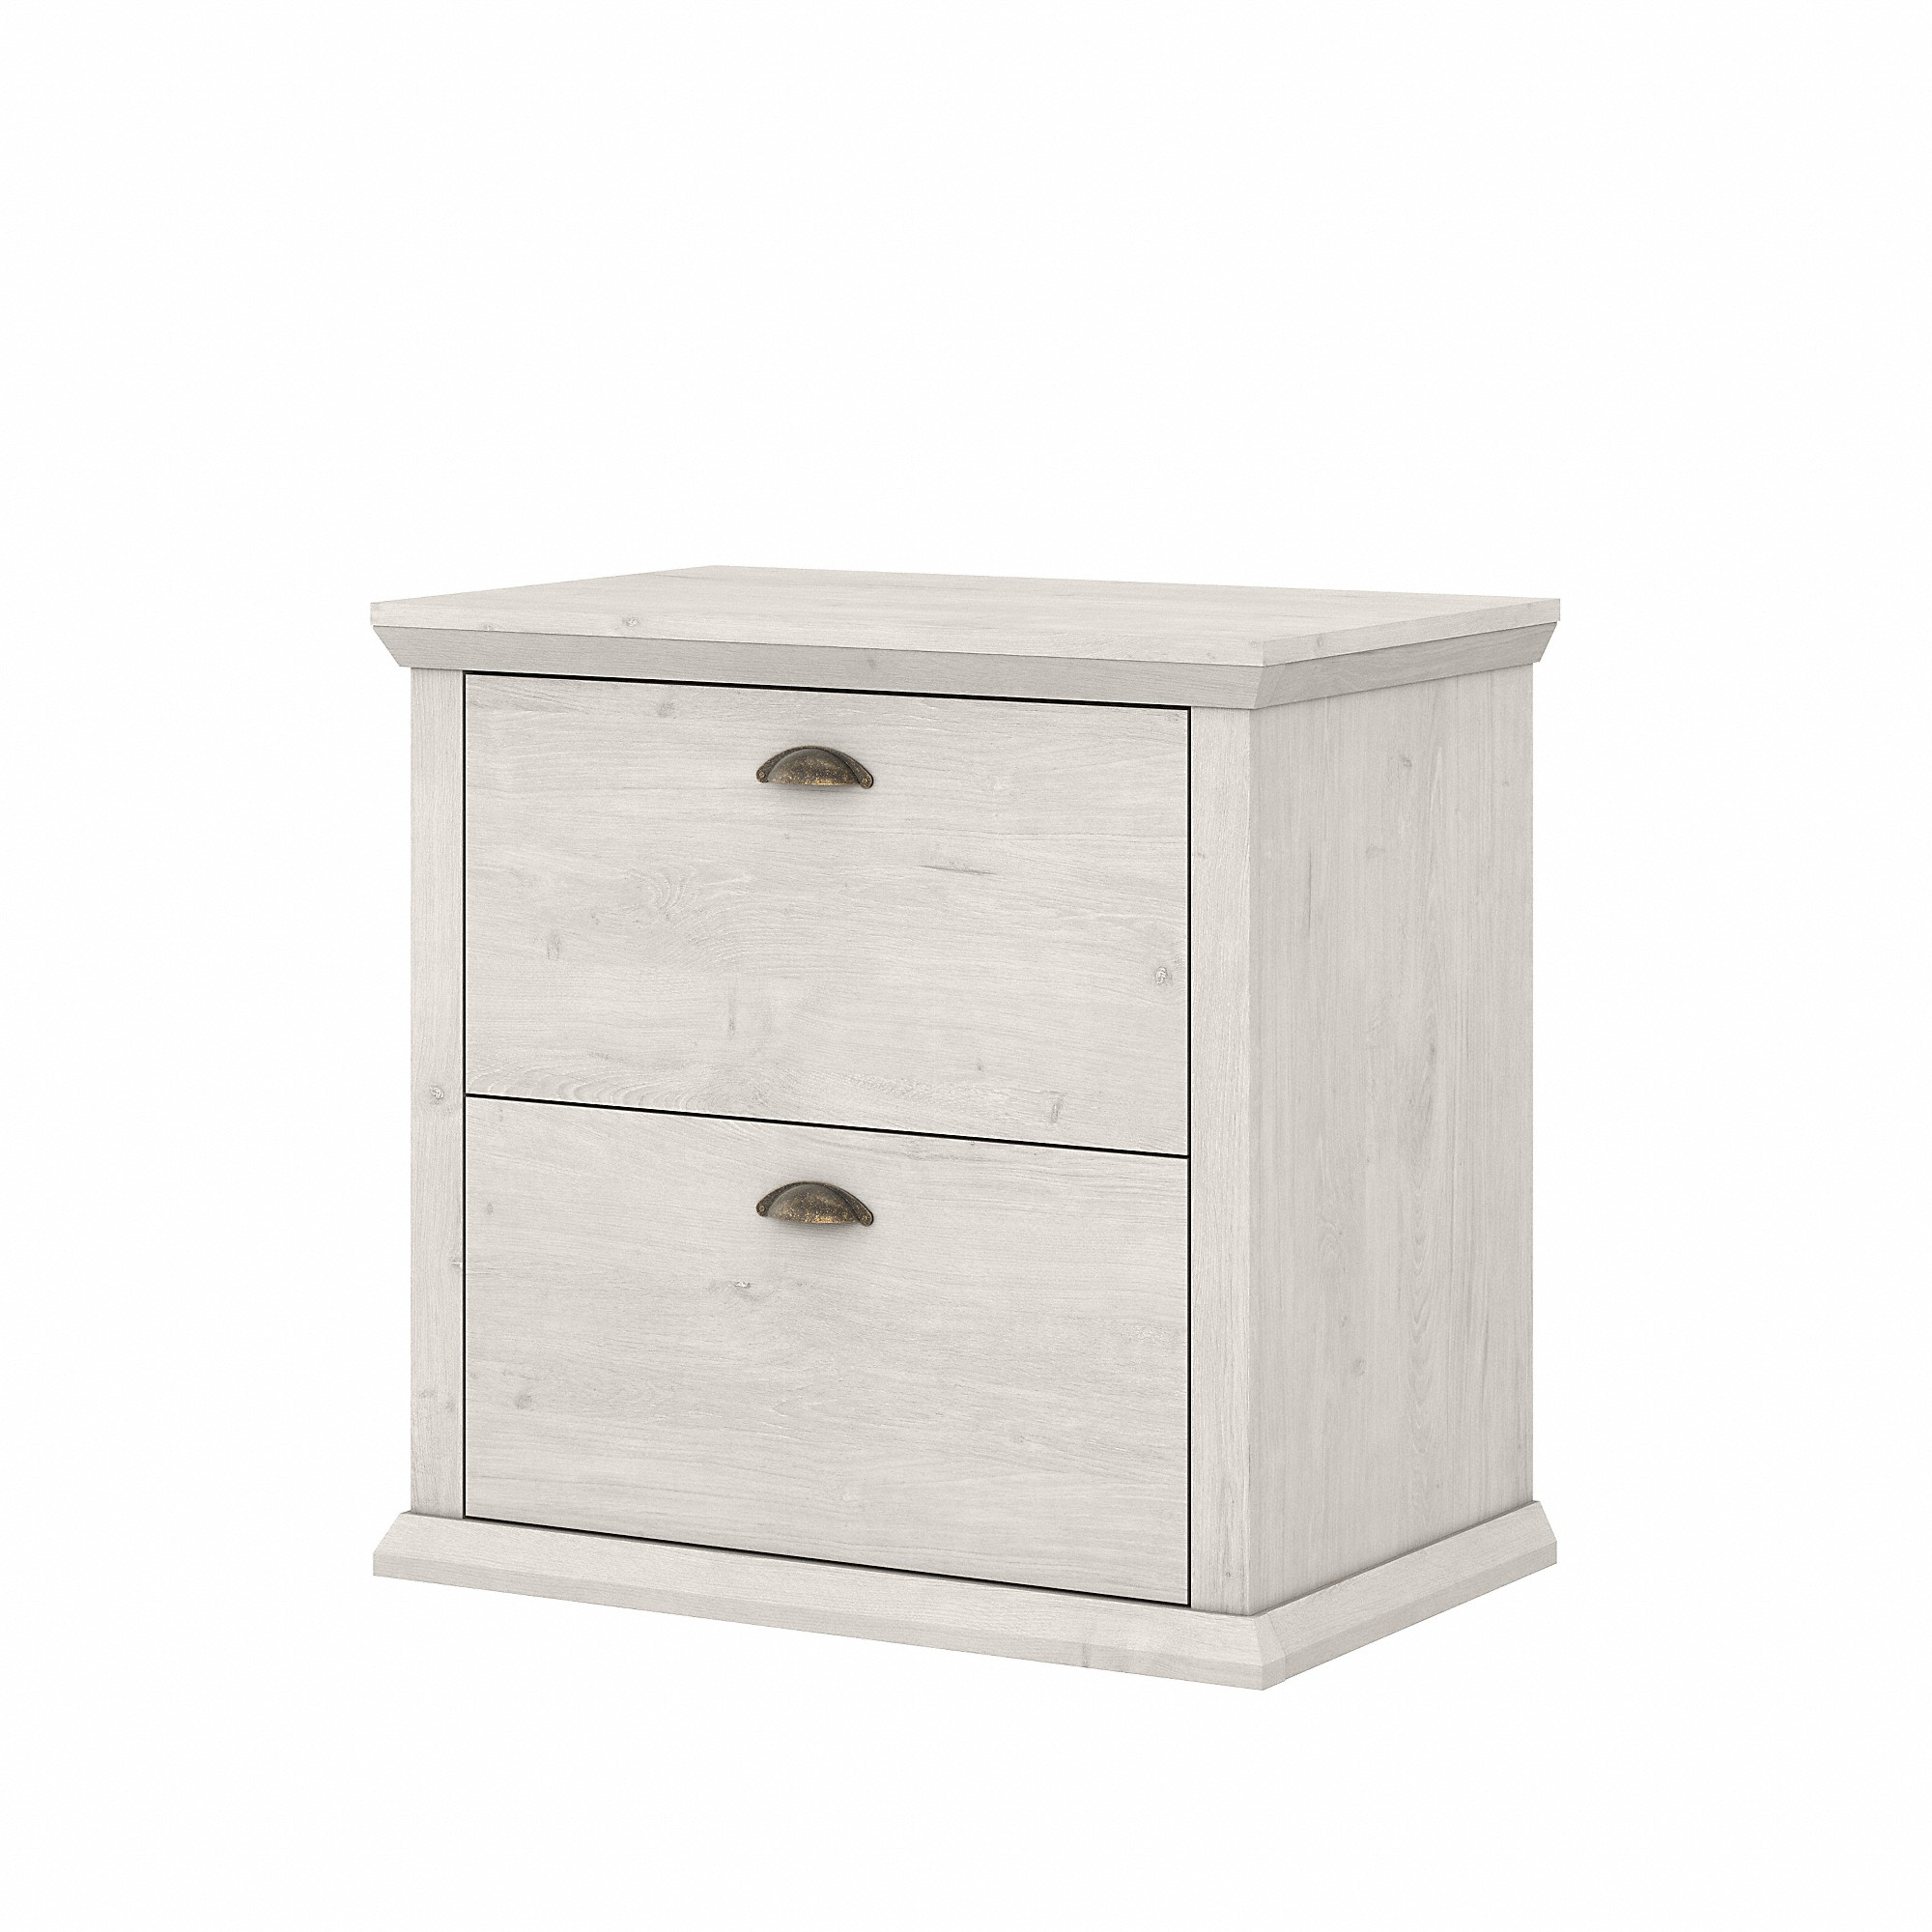 Yorktown 2 Drawer Lateral File Cabinet in Linen White Oak - image 3 of 7